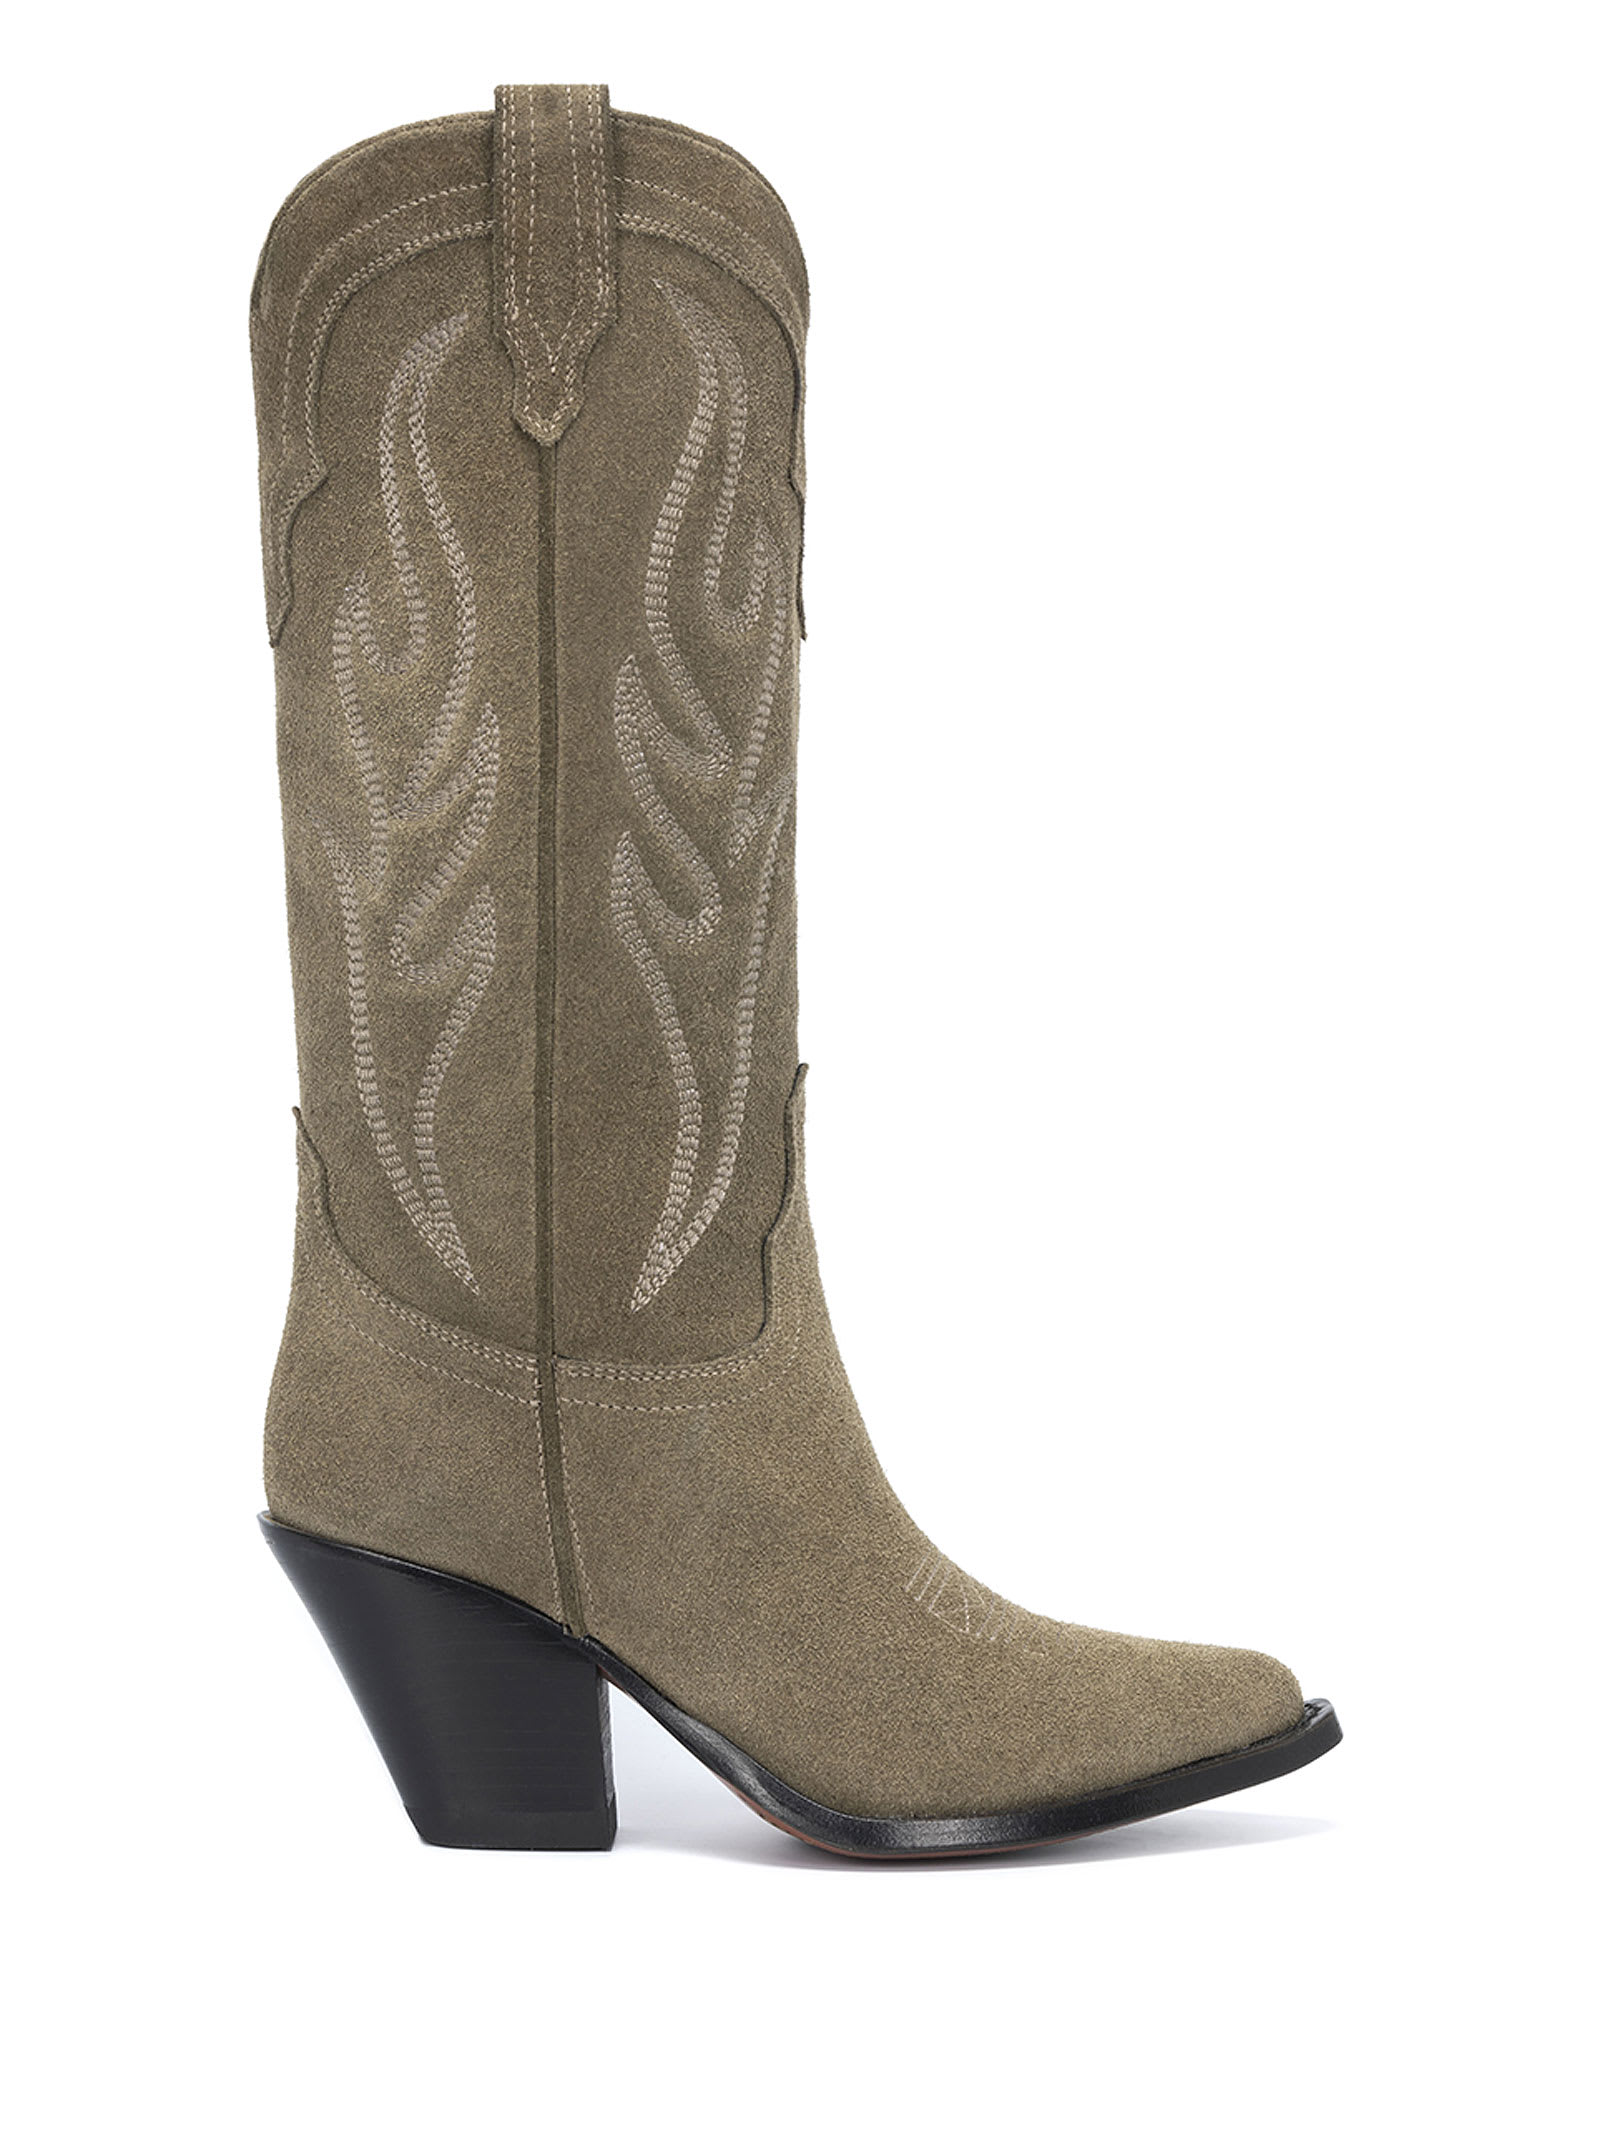 Sonora Santa Fe Cowboy Style Texan Boot In Embroidered Suede In Brown